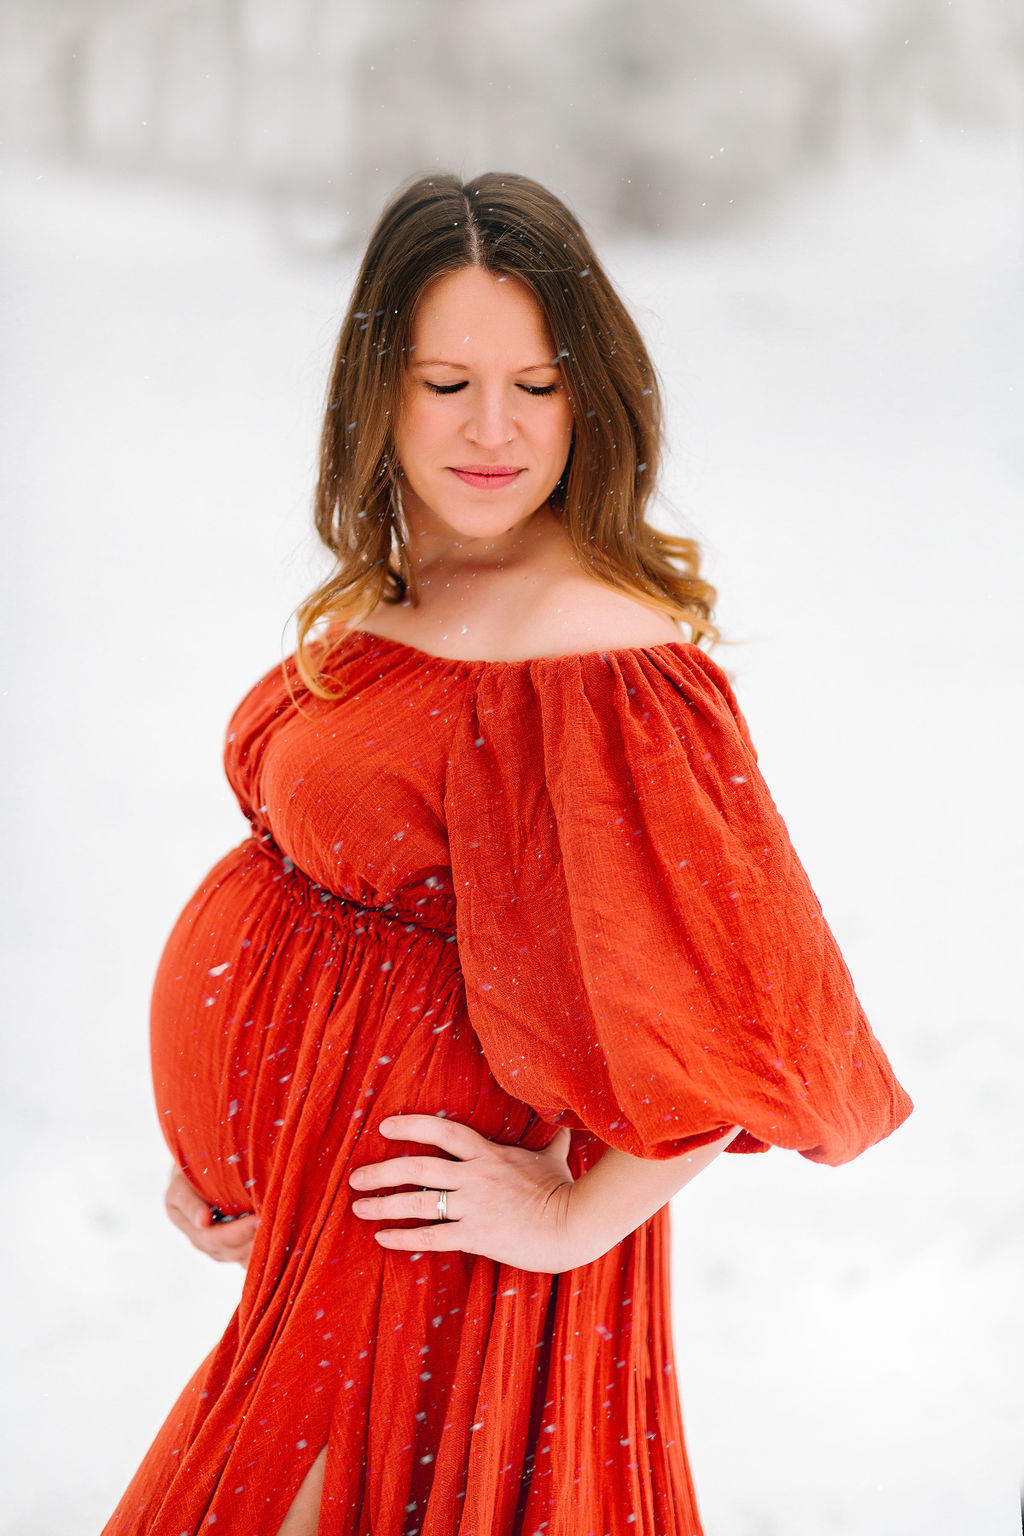 A mother to be in a red maternity dress stands in snow looking down her shoulder premier birth center